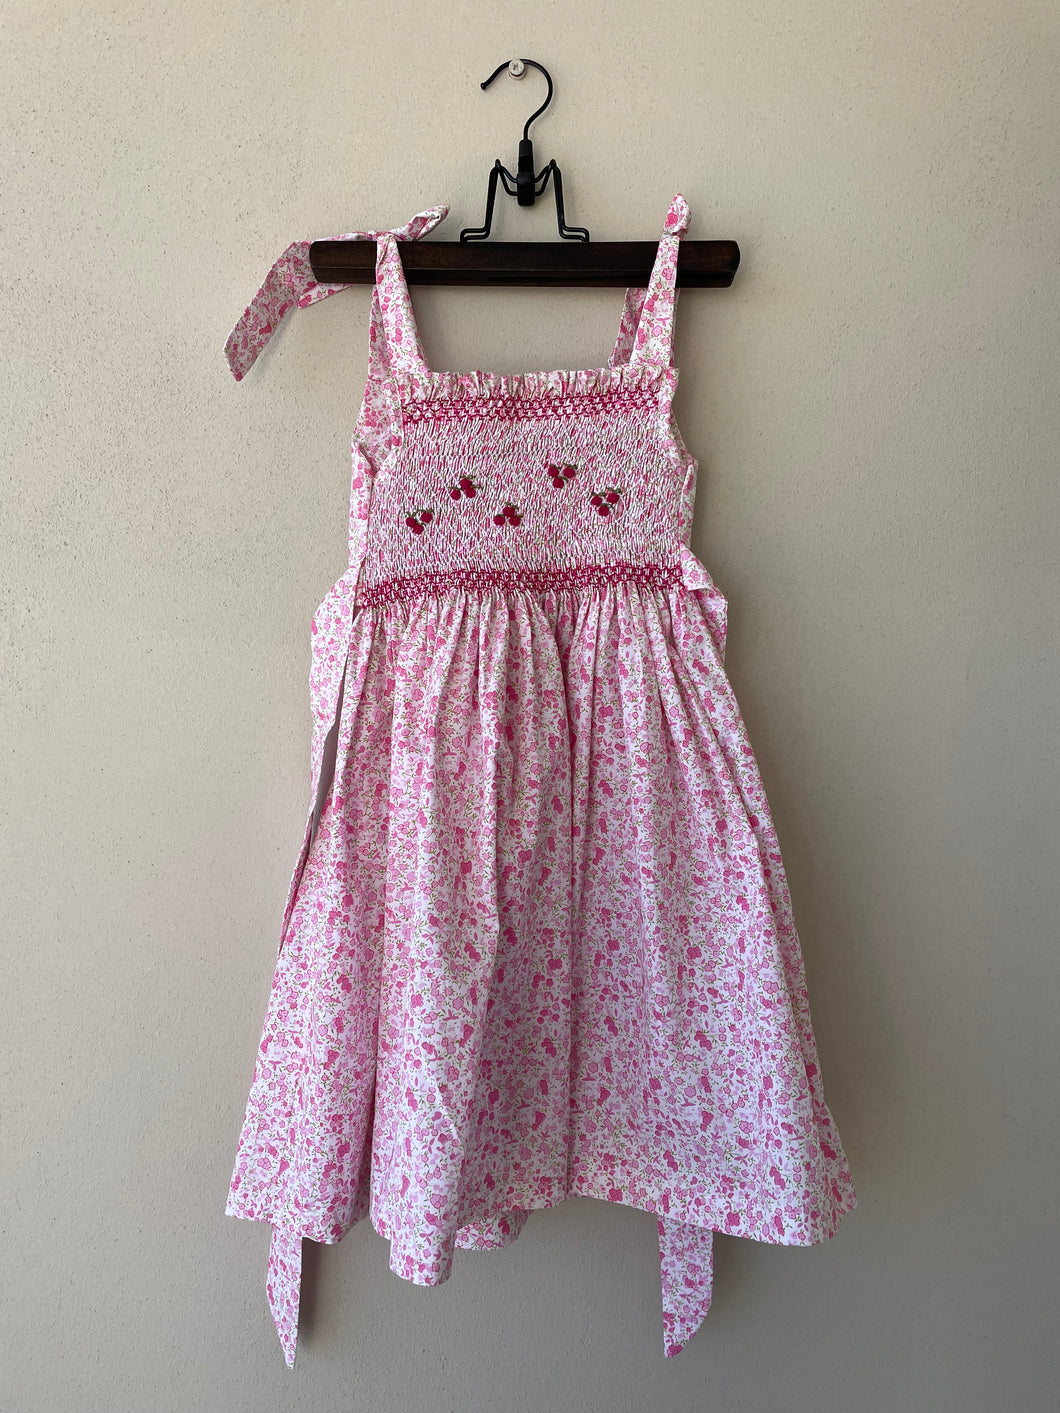 Pink Floral Hand-smocked summer dress #5 years